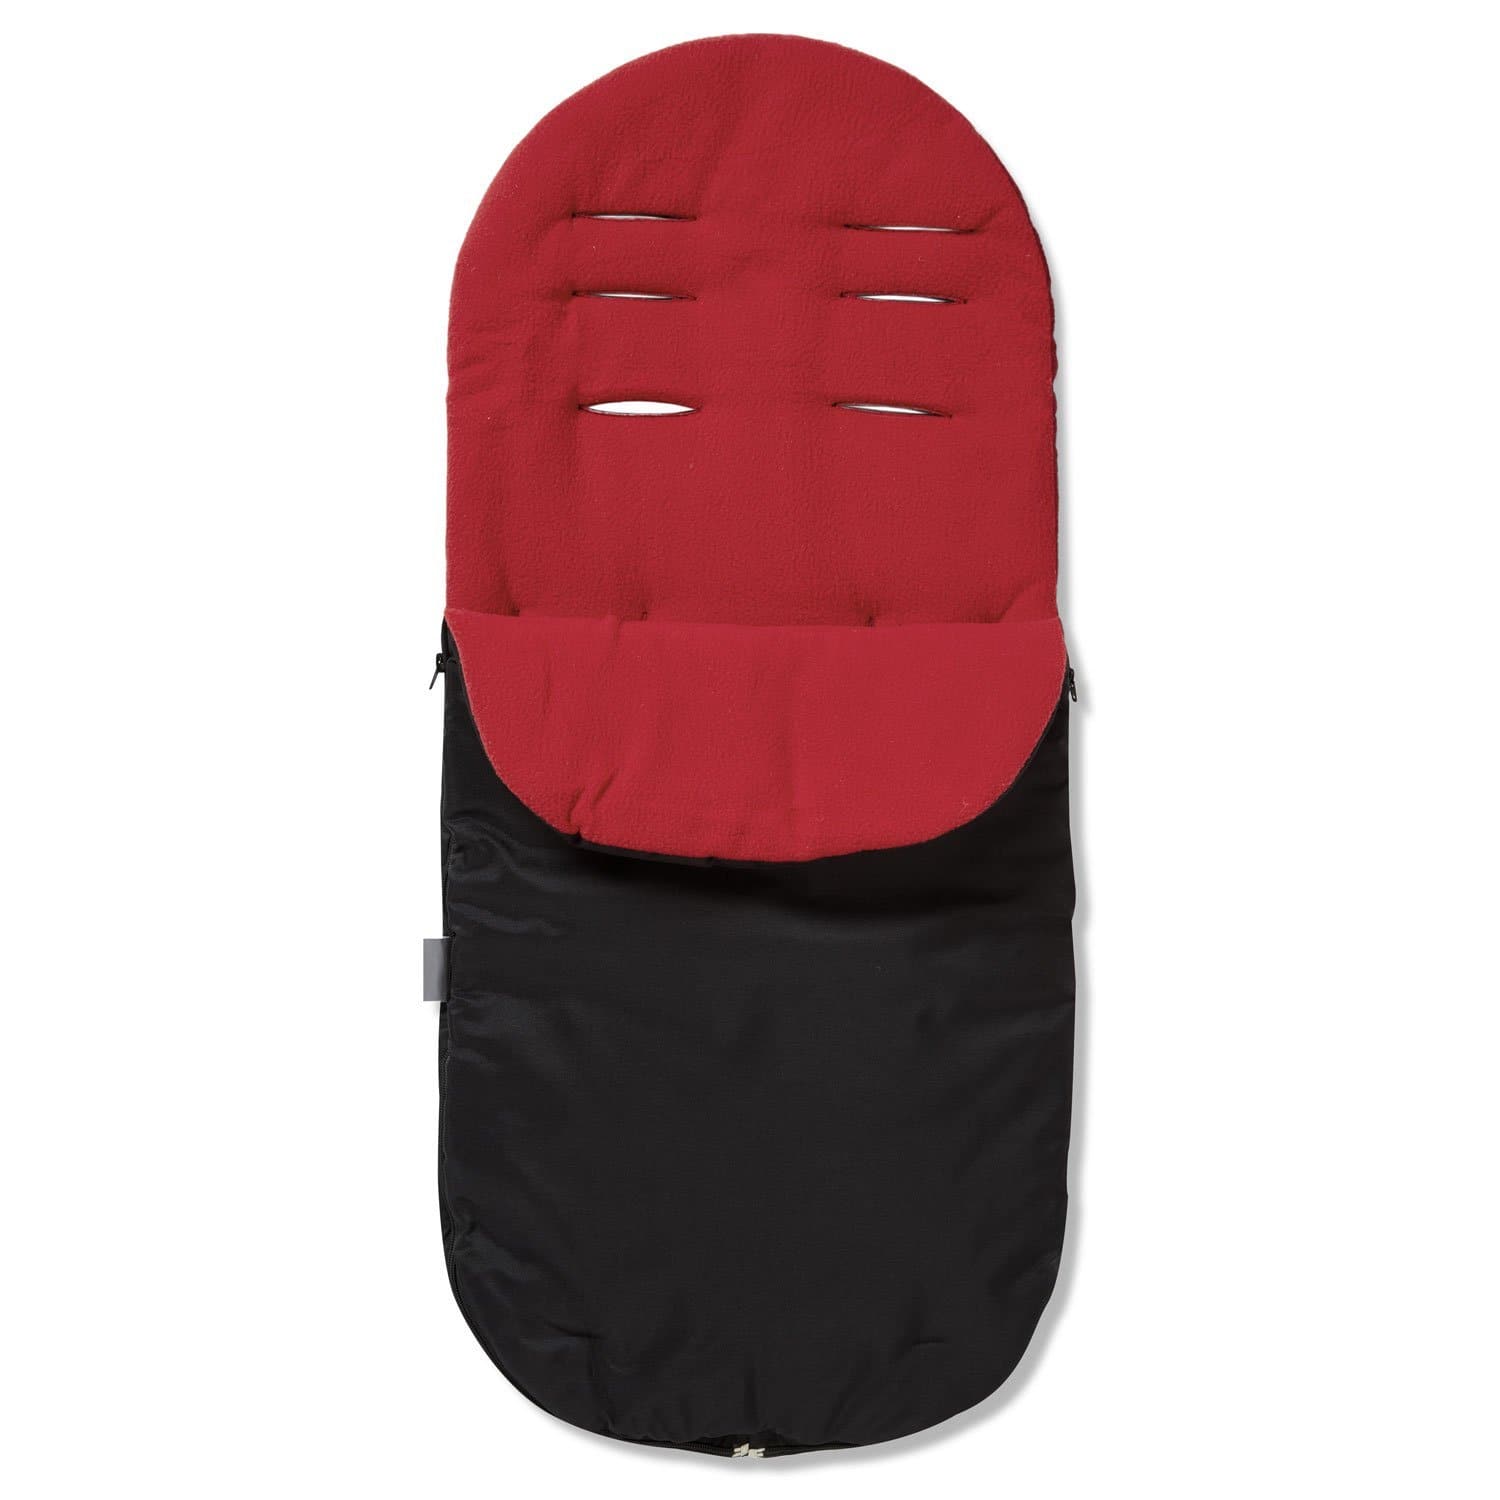 Footmuff / Cosy Toes Compatible with Uppababy - Red / Fits All Models | For Your Little One